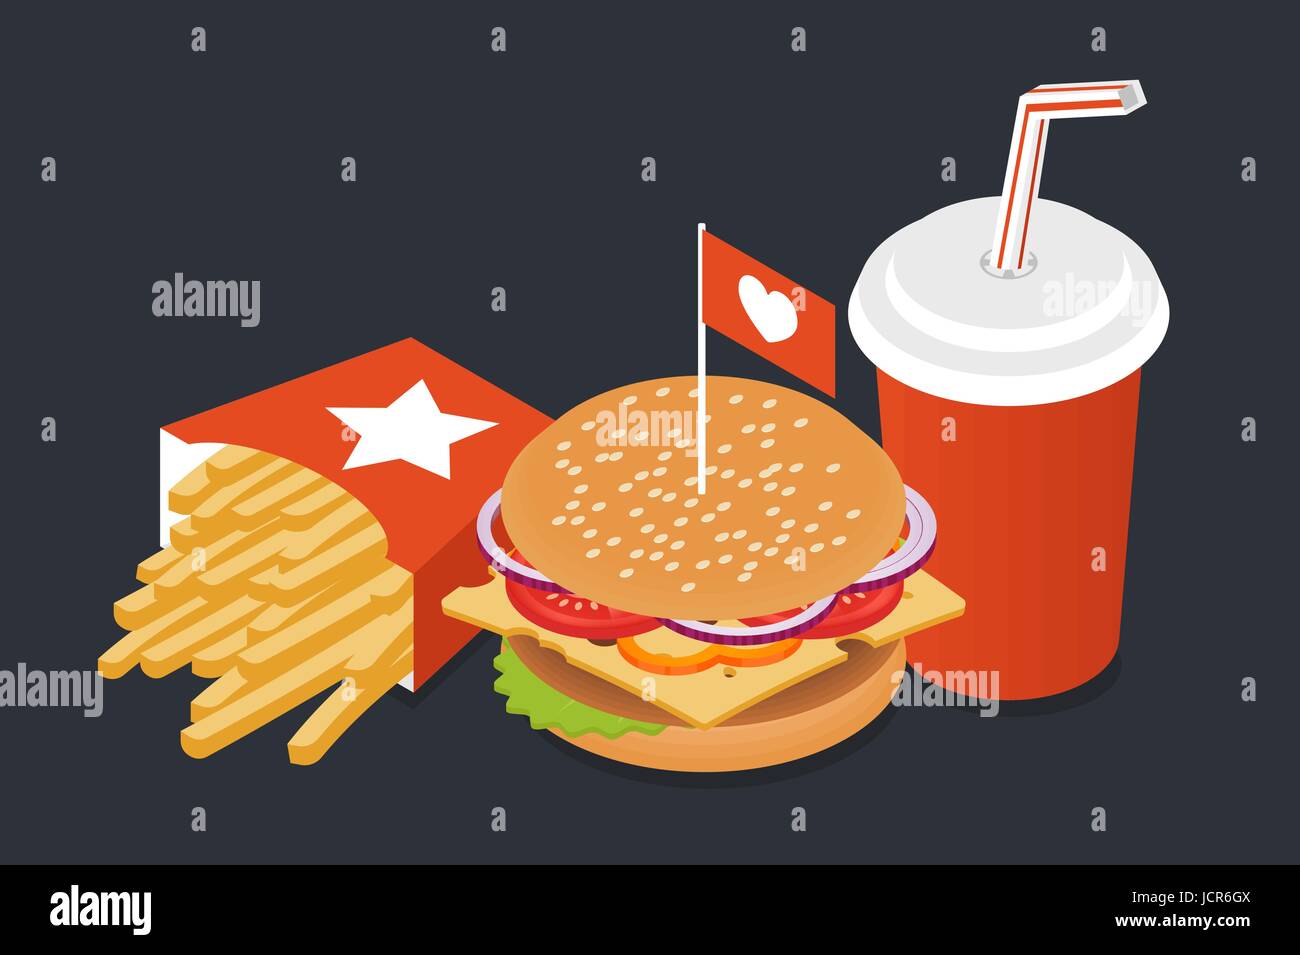 White food box packaging for hamburger lunch Vector Image